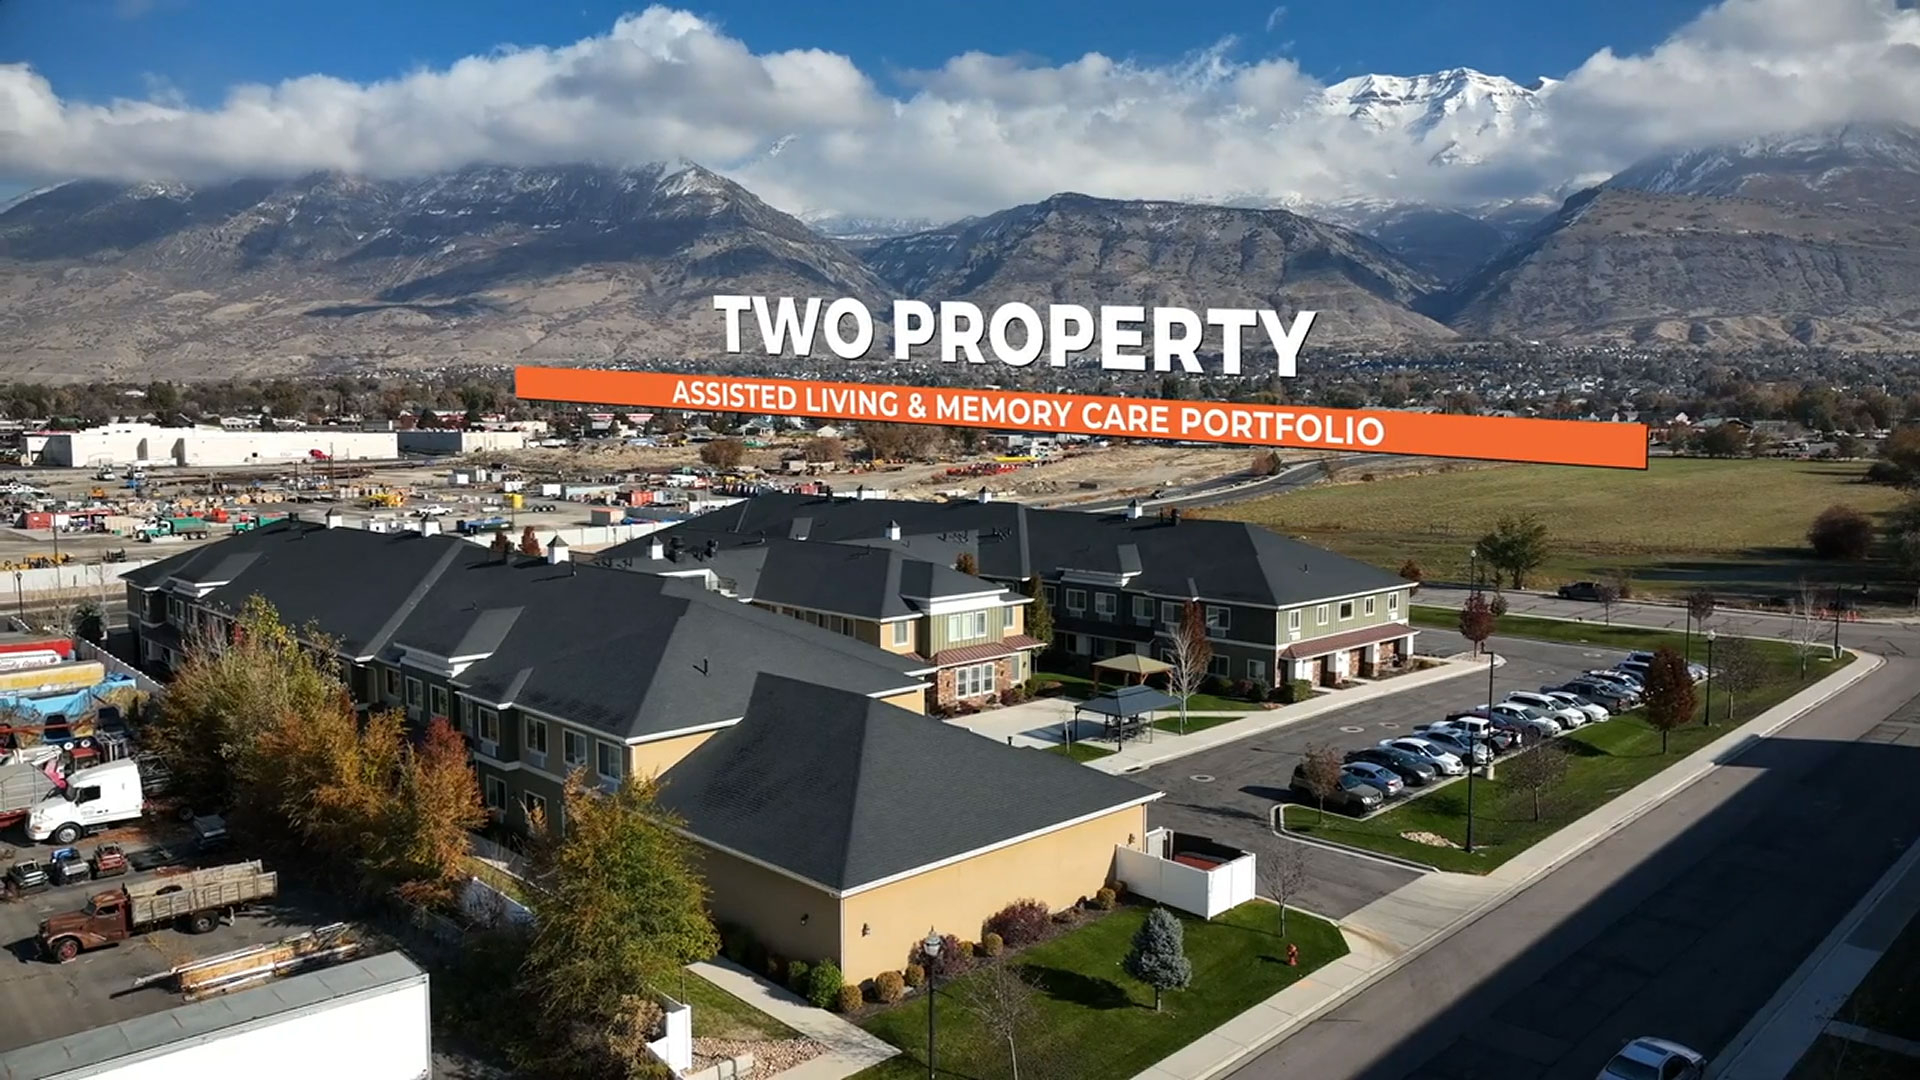 1031 Crowdfunding Portfolio 4 DST is a 178-unit memory care and assisted living portfolio. The portfolio consists of two facilities in St. George and Lindon, Utah.